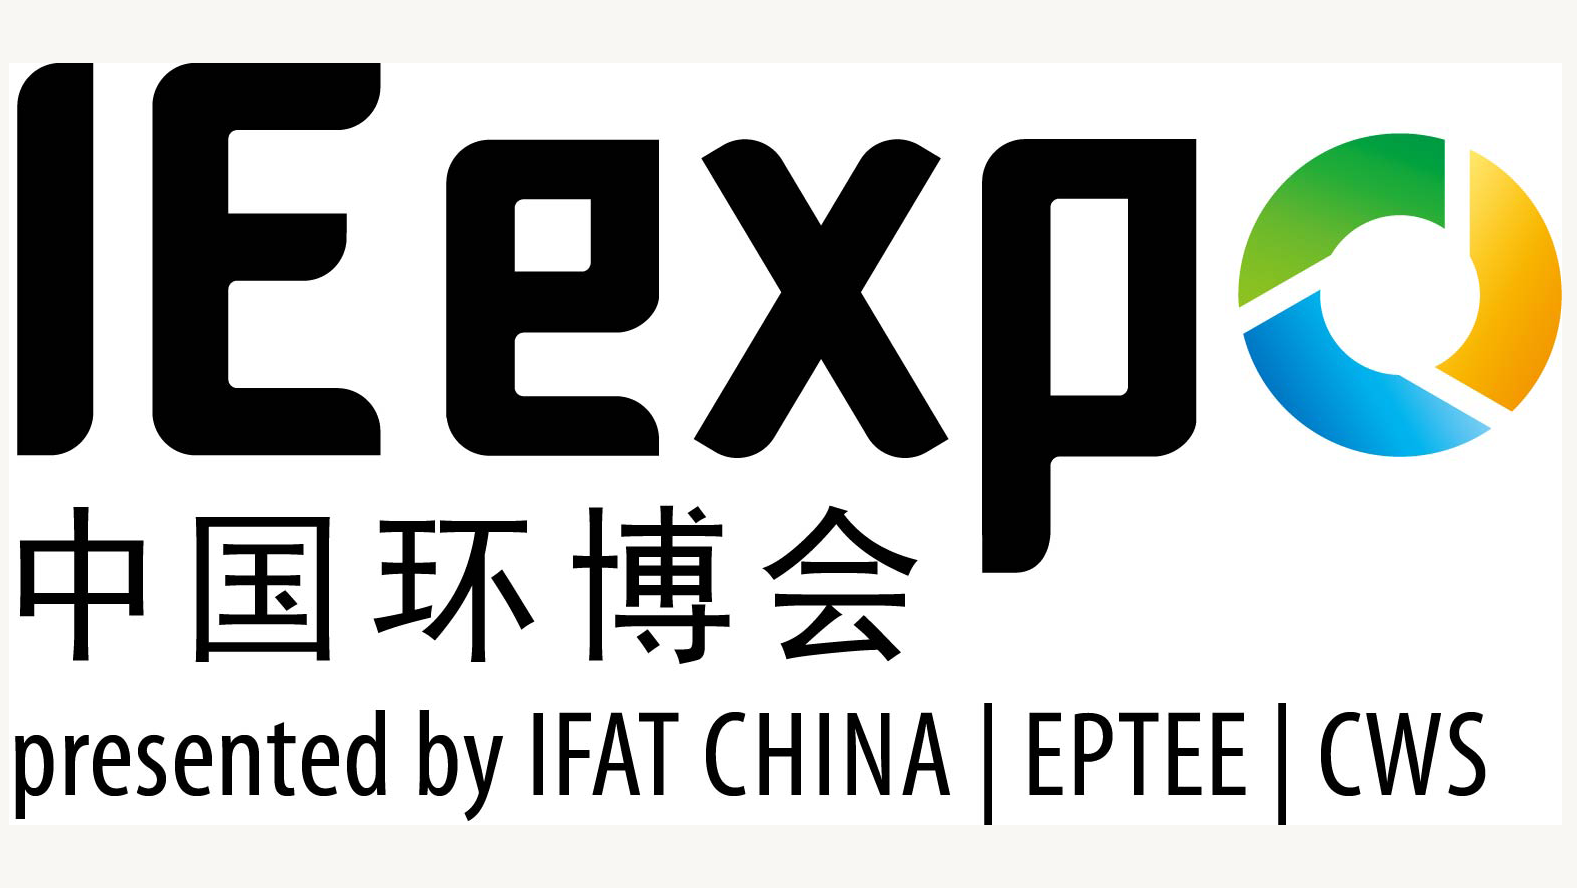 IE Expo 2014